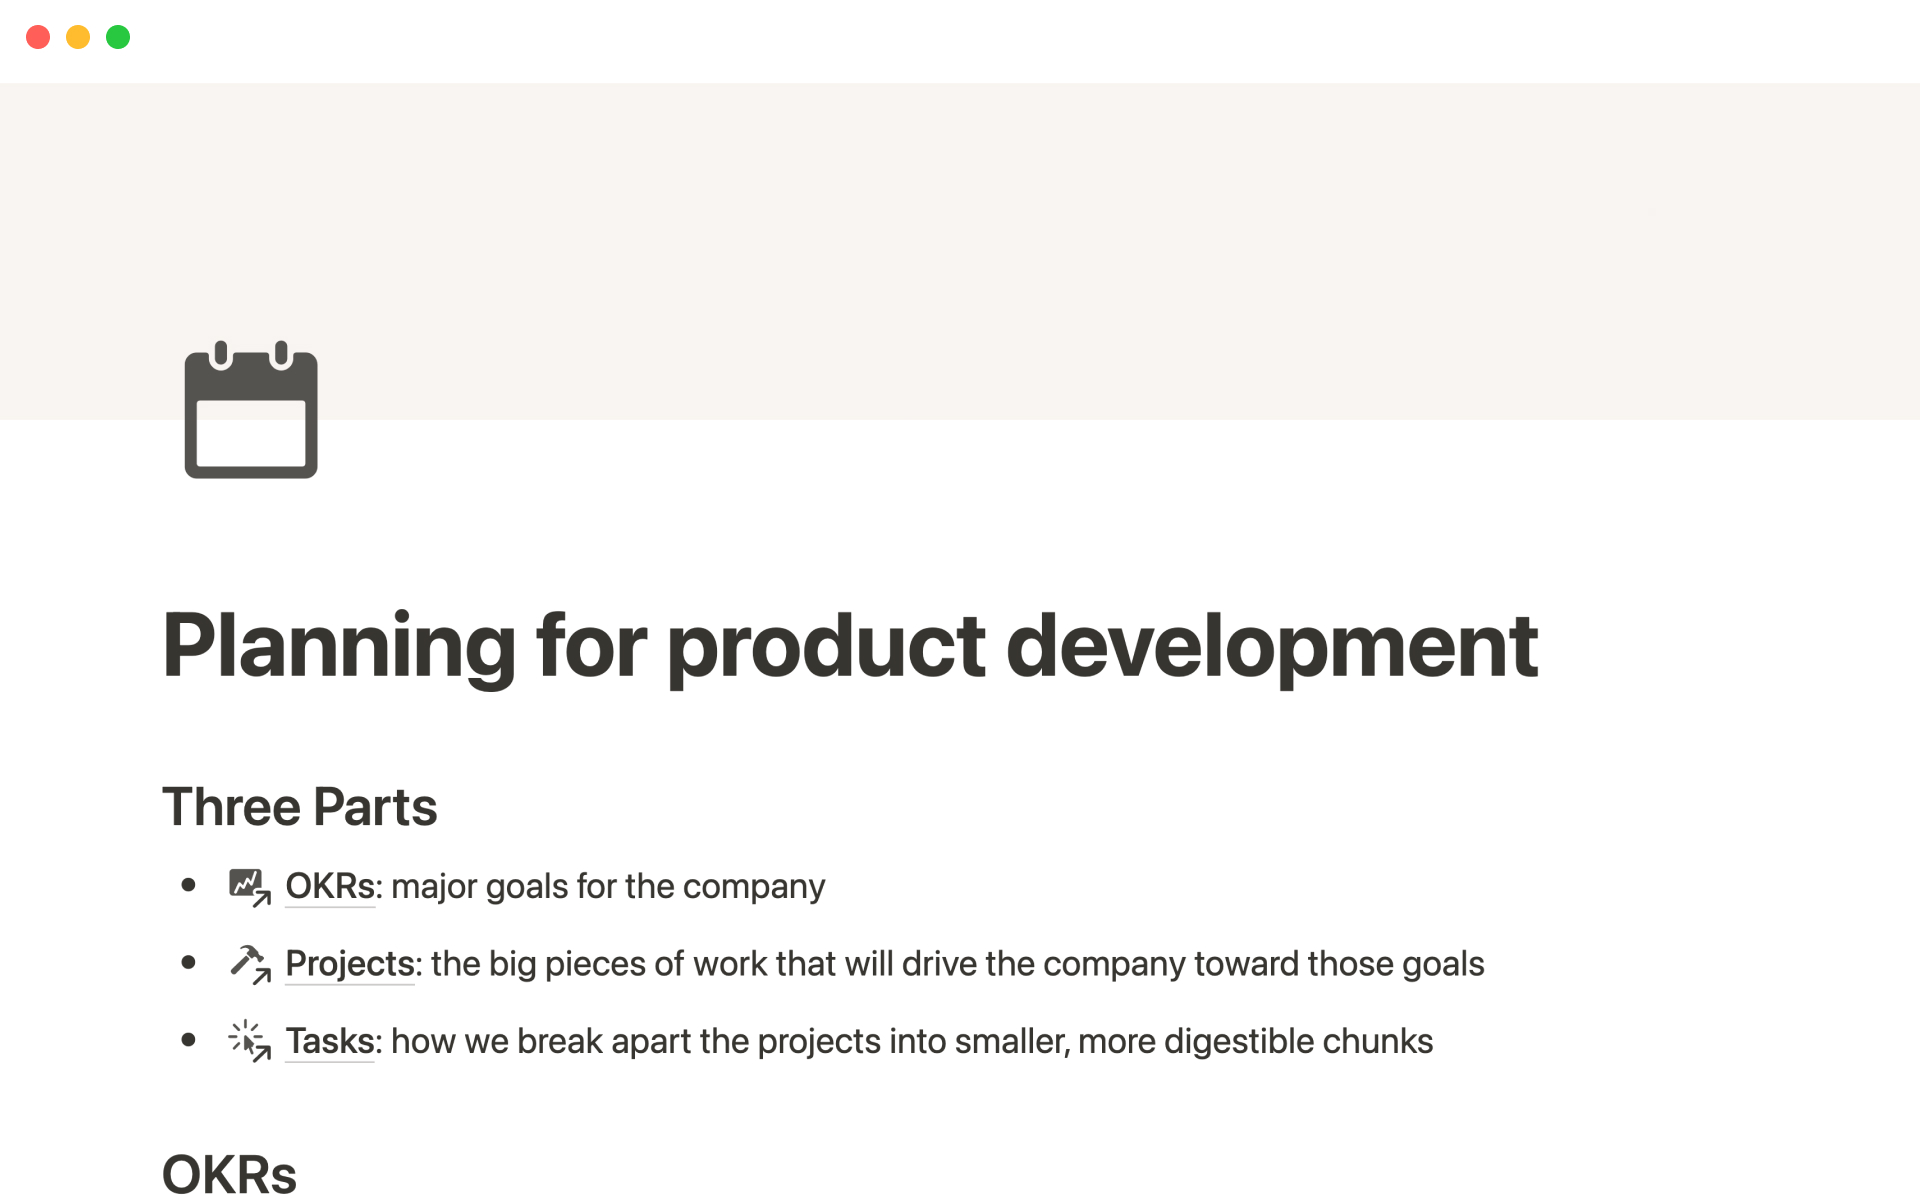 Plan your product development by connecting your OKRs, projects, and tasks.